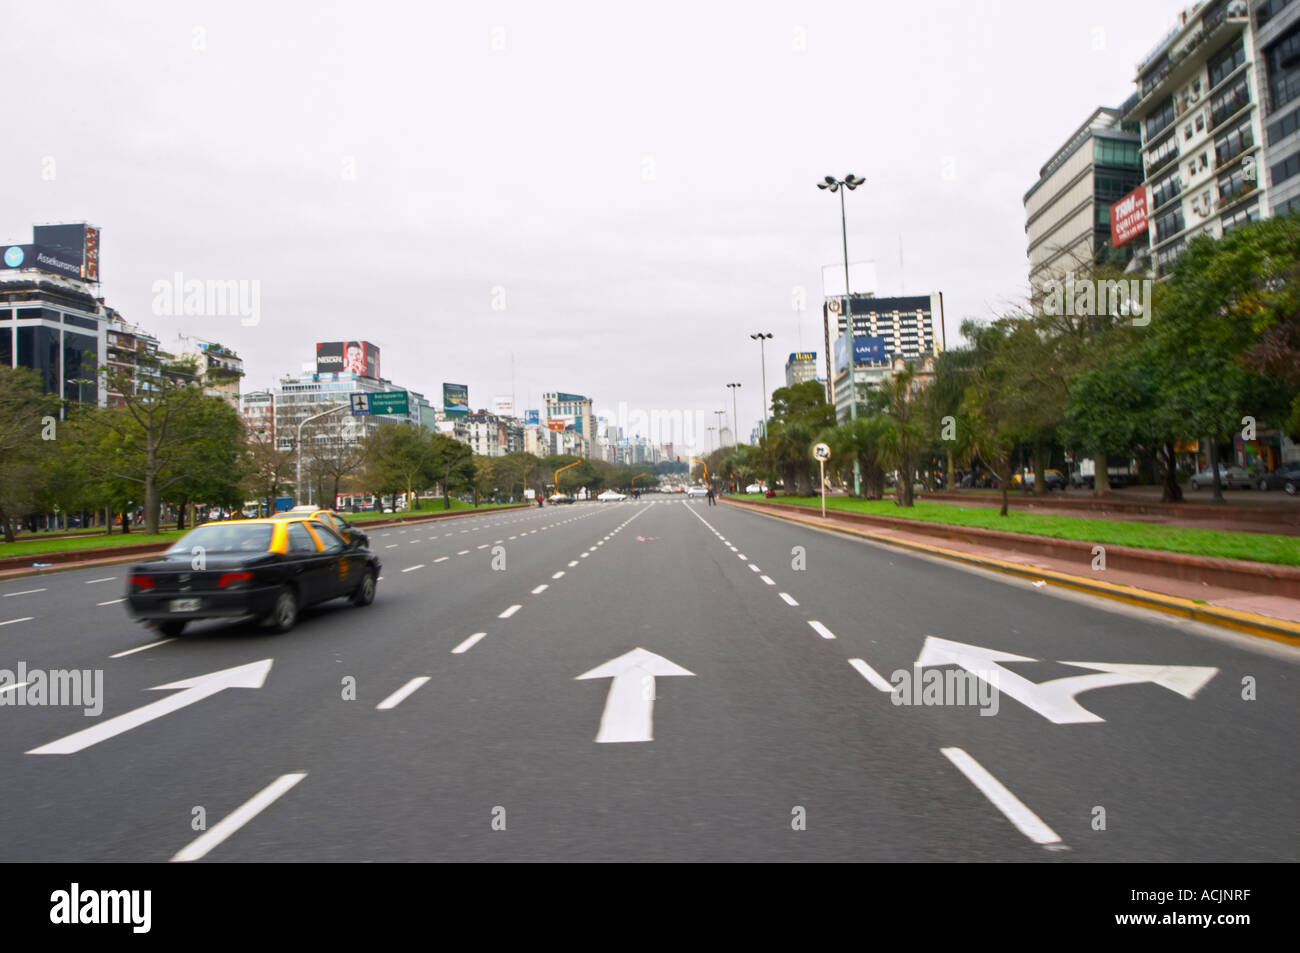 the Avenida 9 Julio Avenue of ninth of July, said to be the world's widest street, lined by trees and modern office block buildings. taxis Buenos Aires Argentina, South America Stock Photo